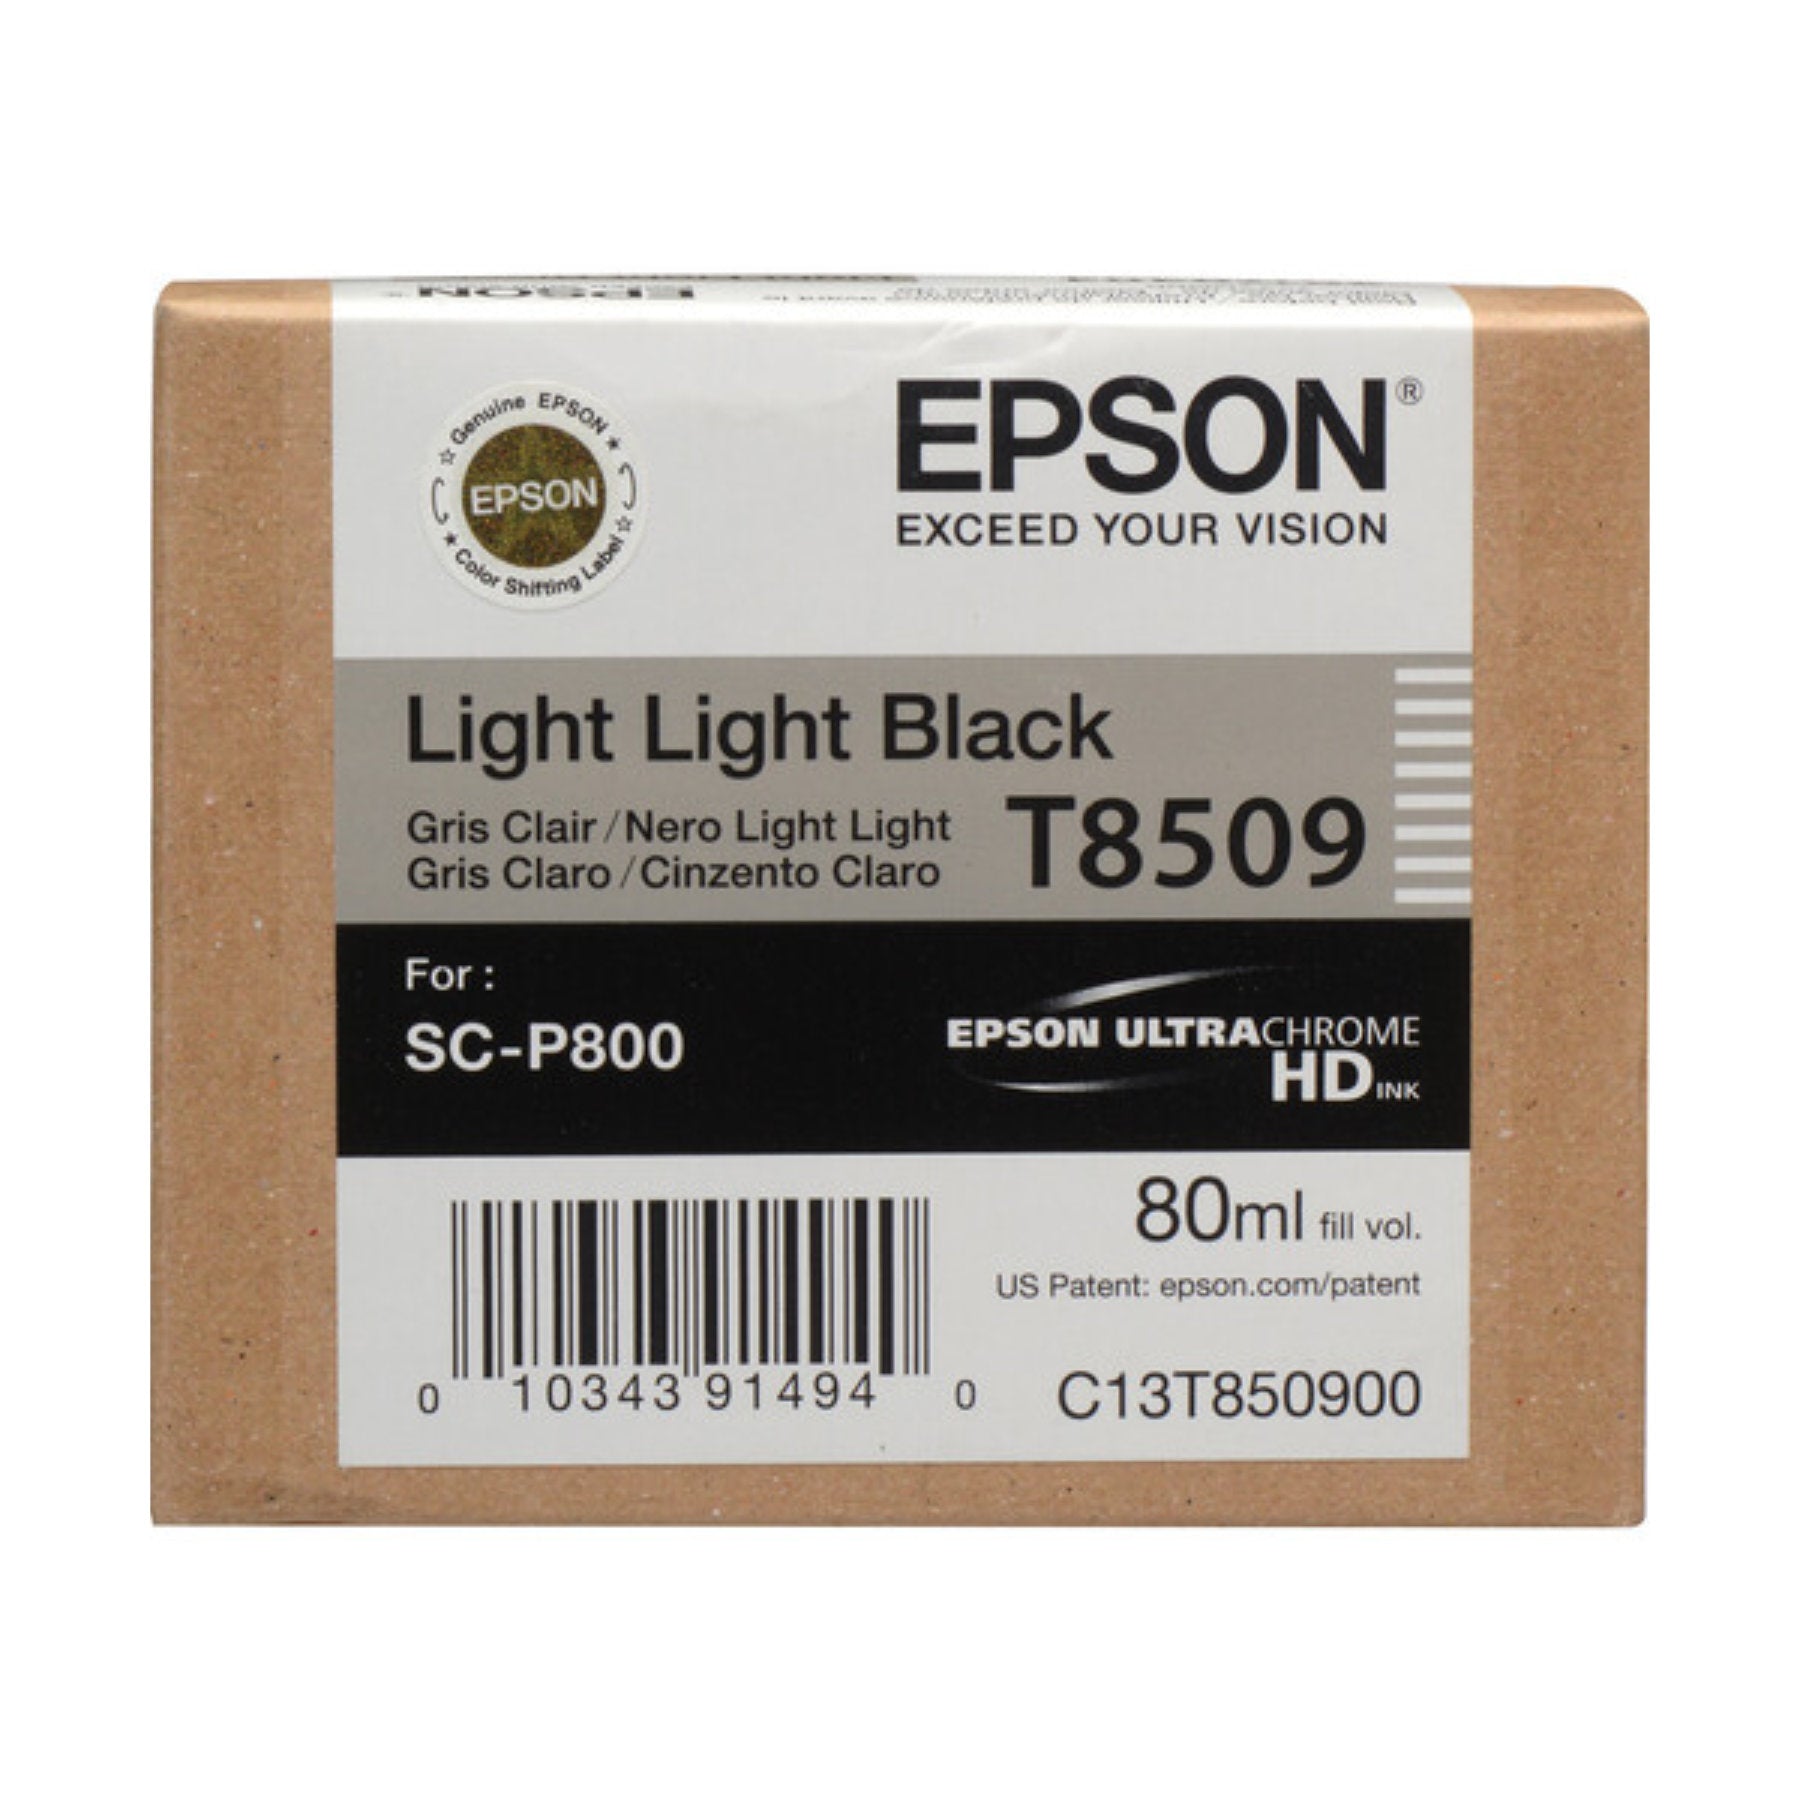 Buy Epson UltraChrome HD Ink Cartridge for SC-P800 Printer at Topic Store